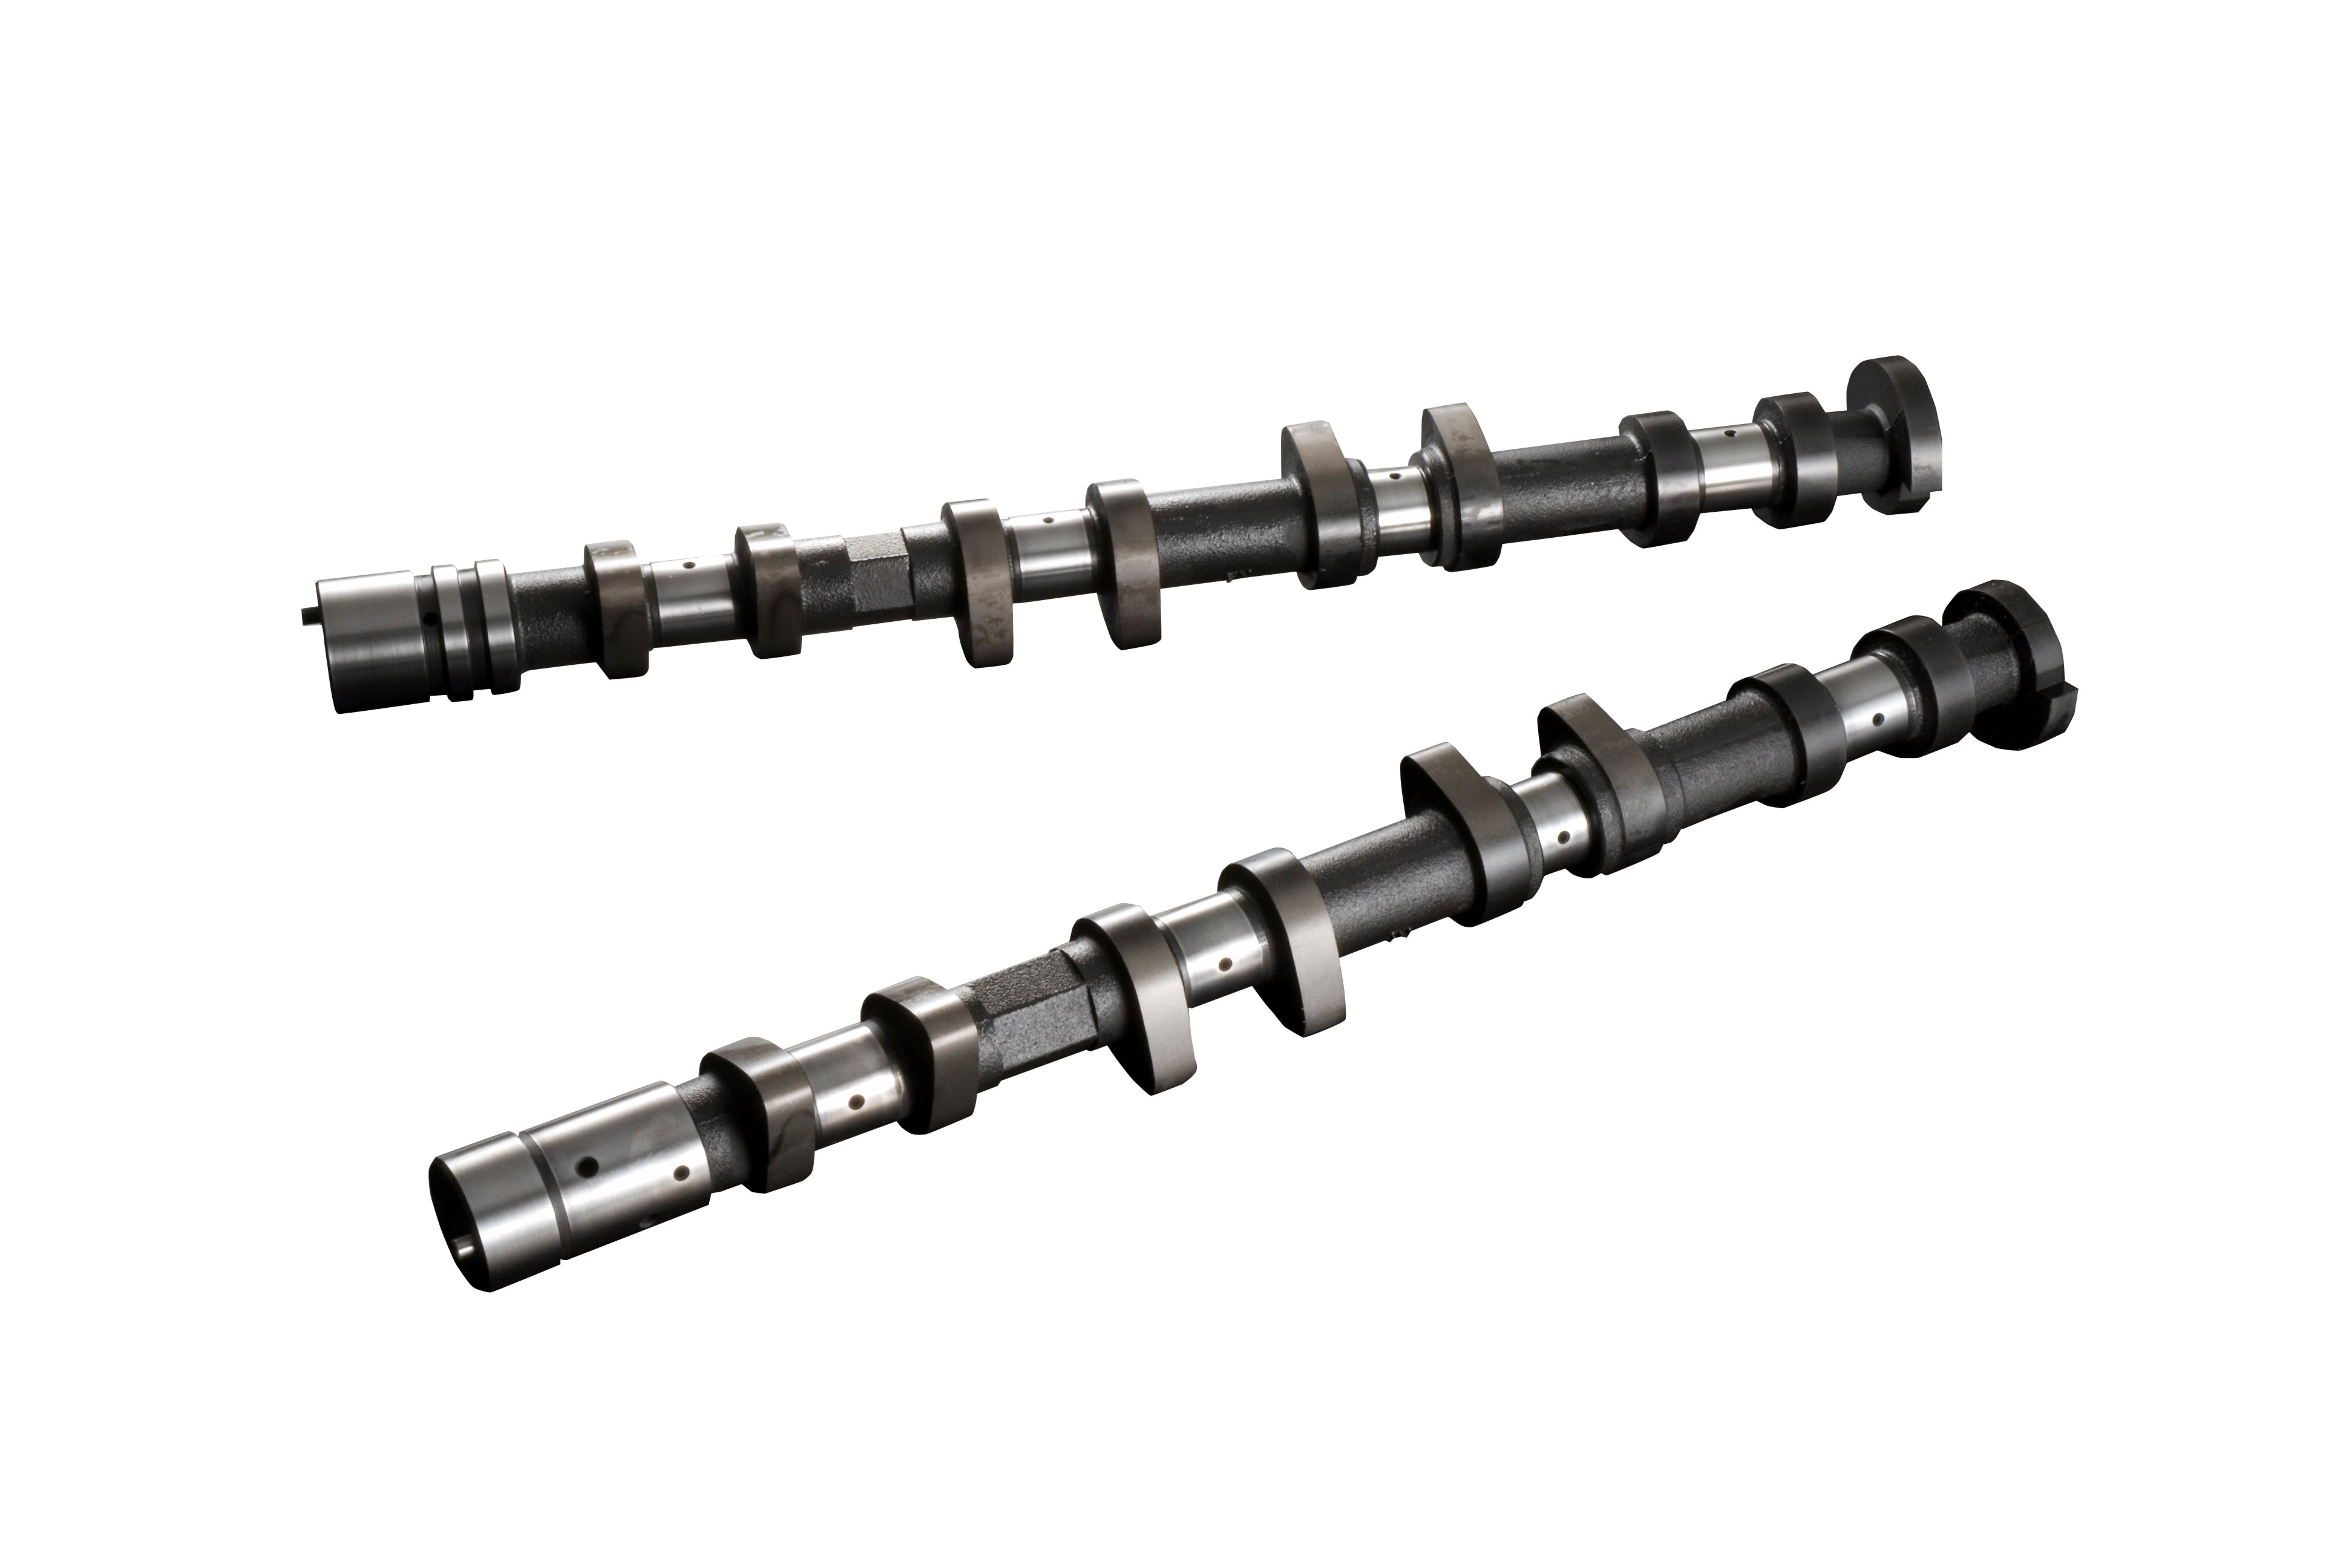 TOMEI CAMSHAFT SET PONCAM G4KF 262-10.30/9.80 (Previous Part Number 143074)